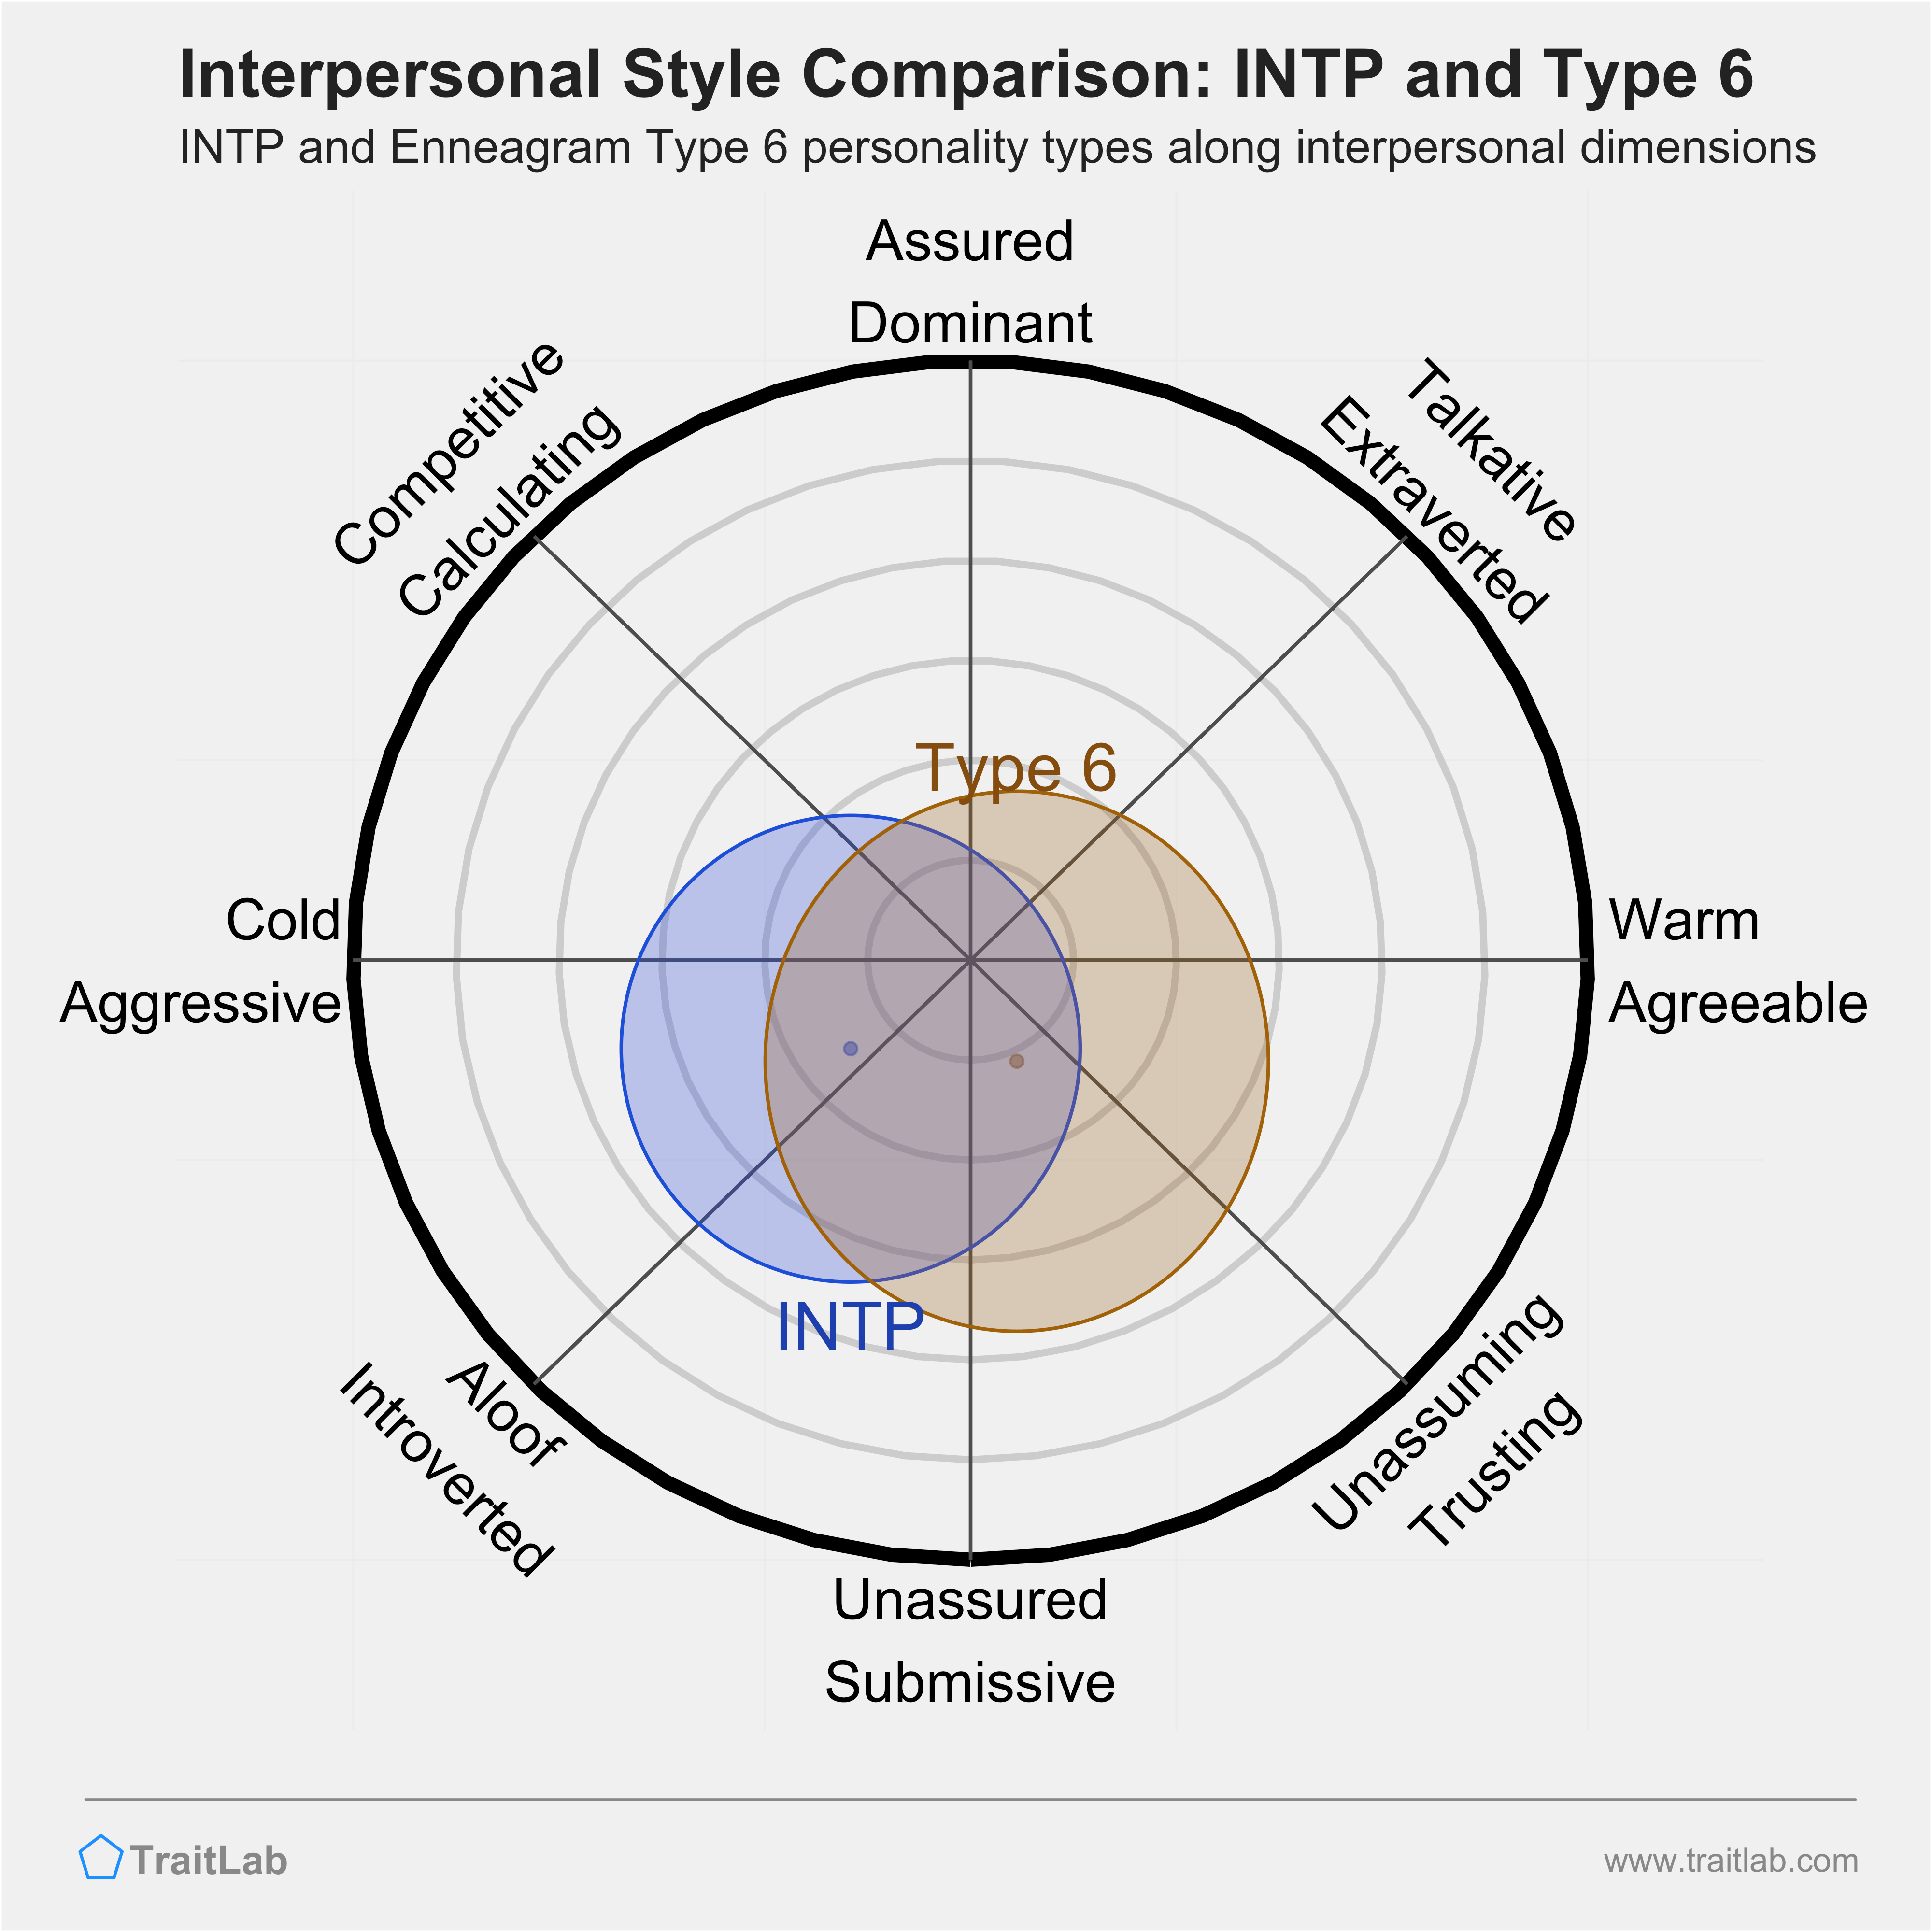 Enneagram INTP and Type 6 comparison across interpersonal dimensions